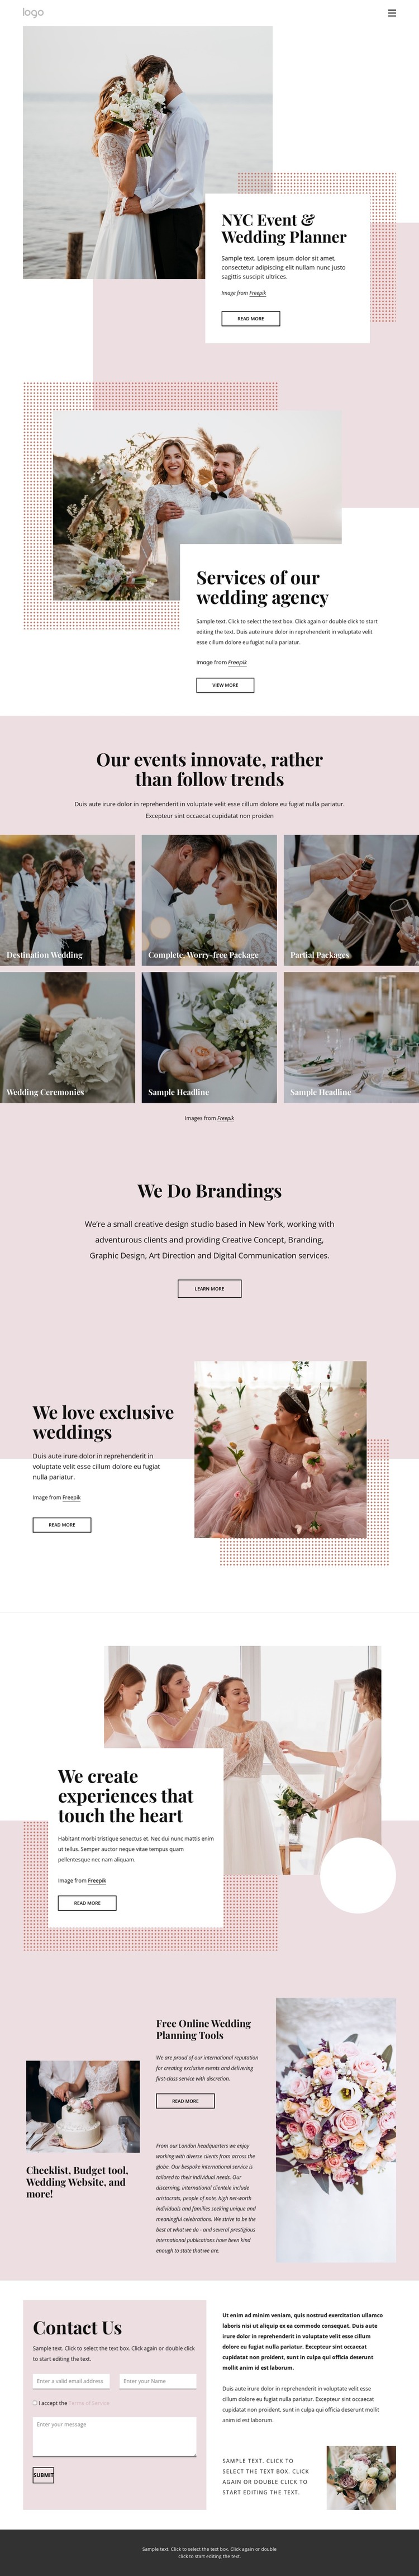 We create stress-free planning experience HTML Template